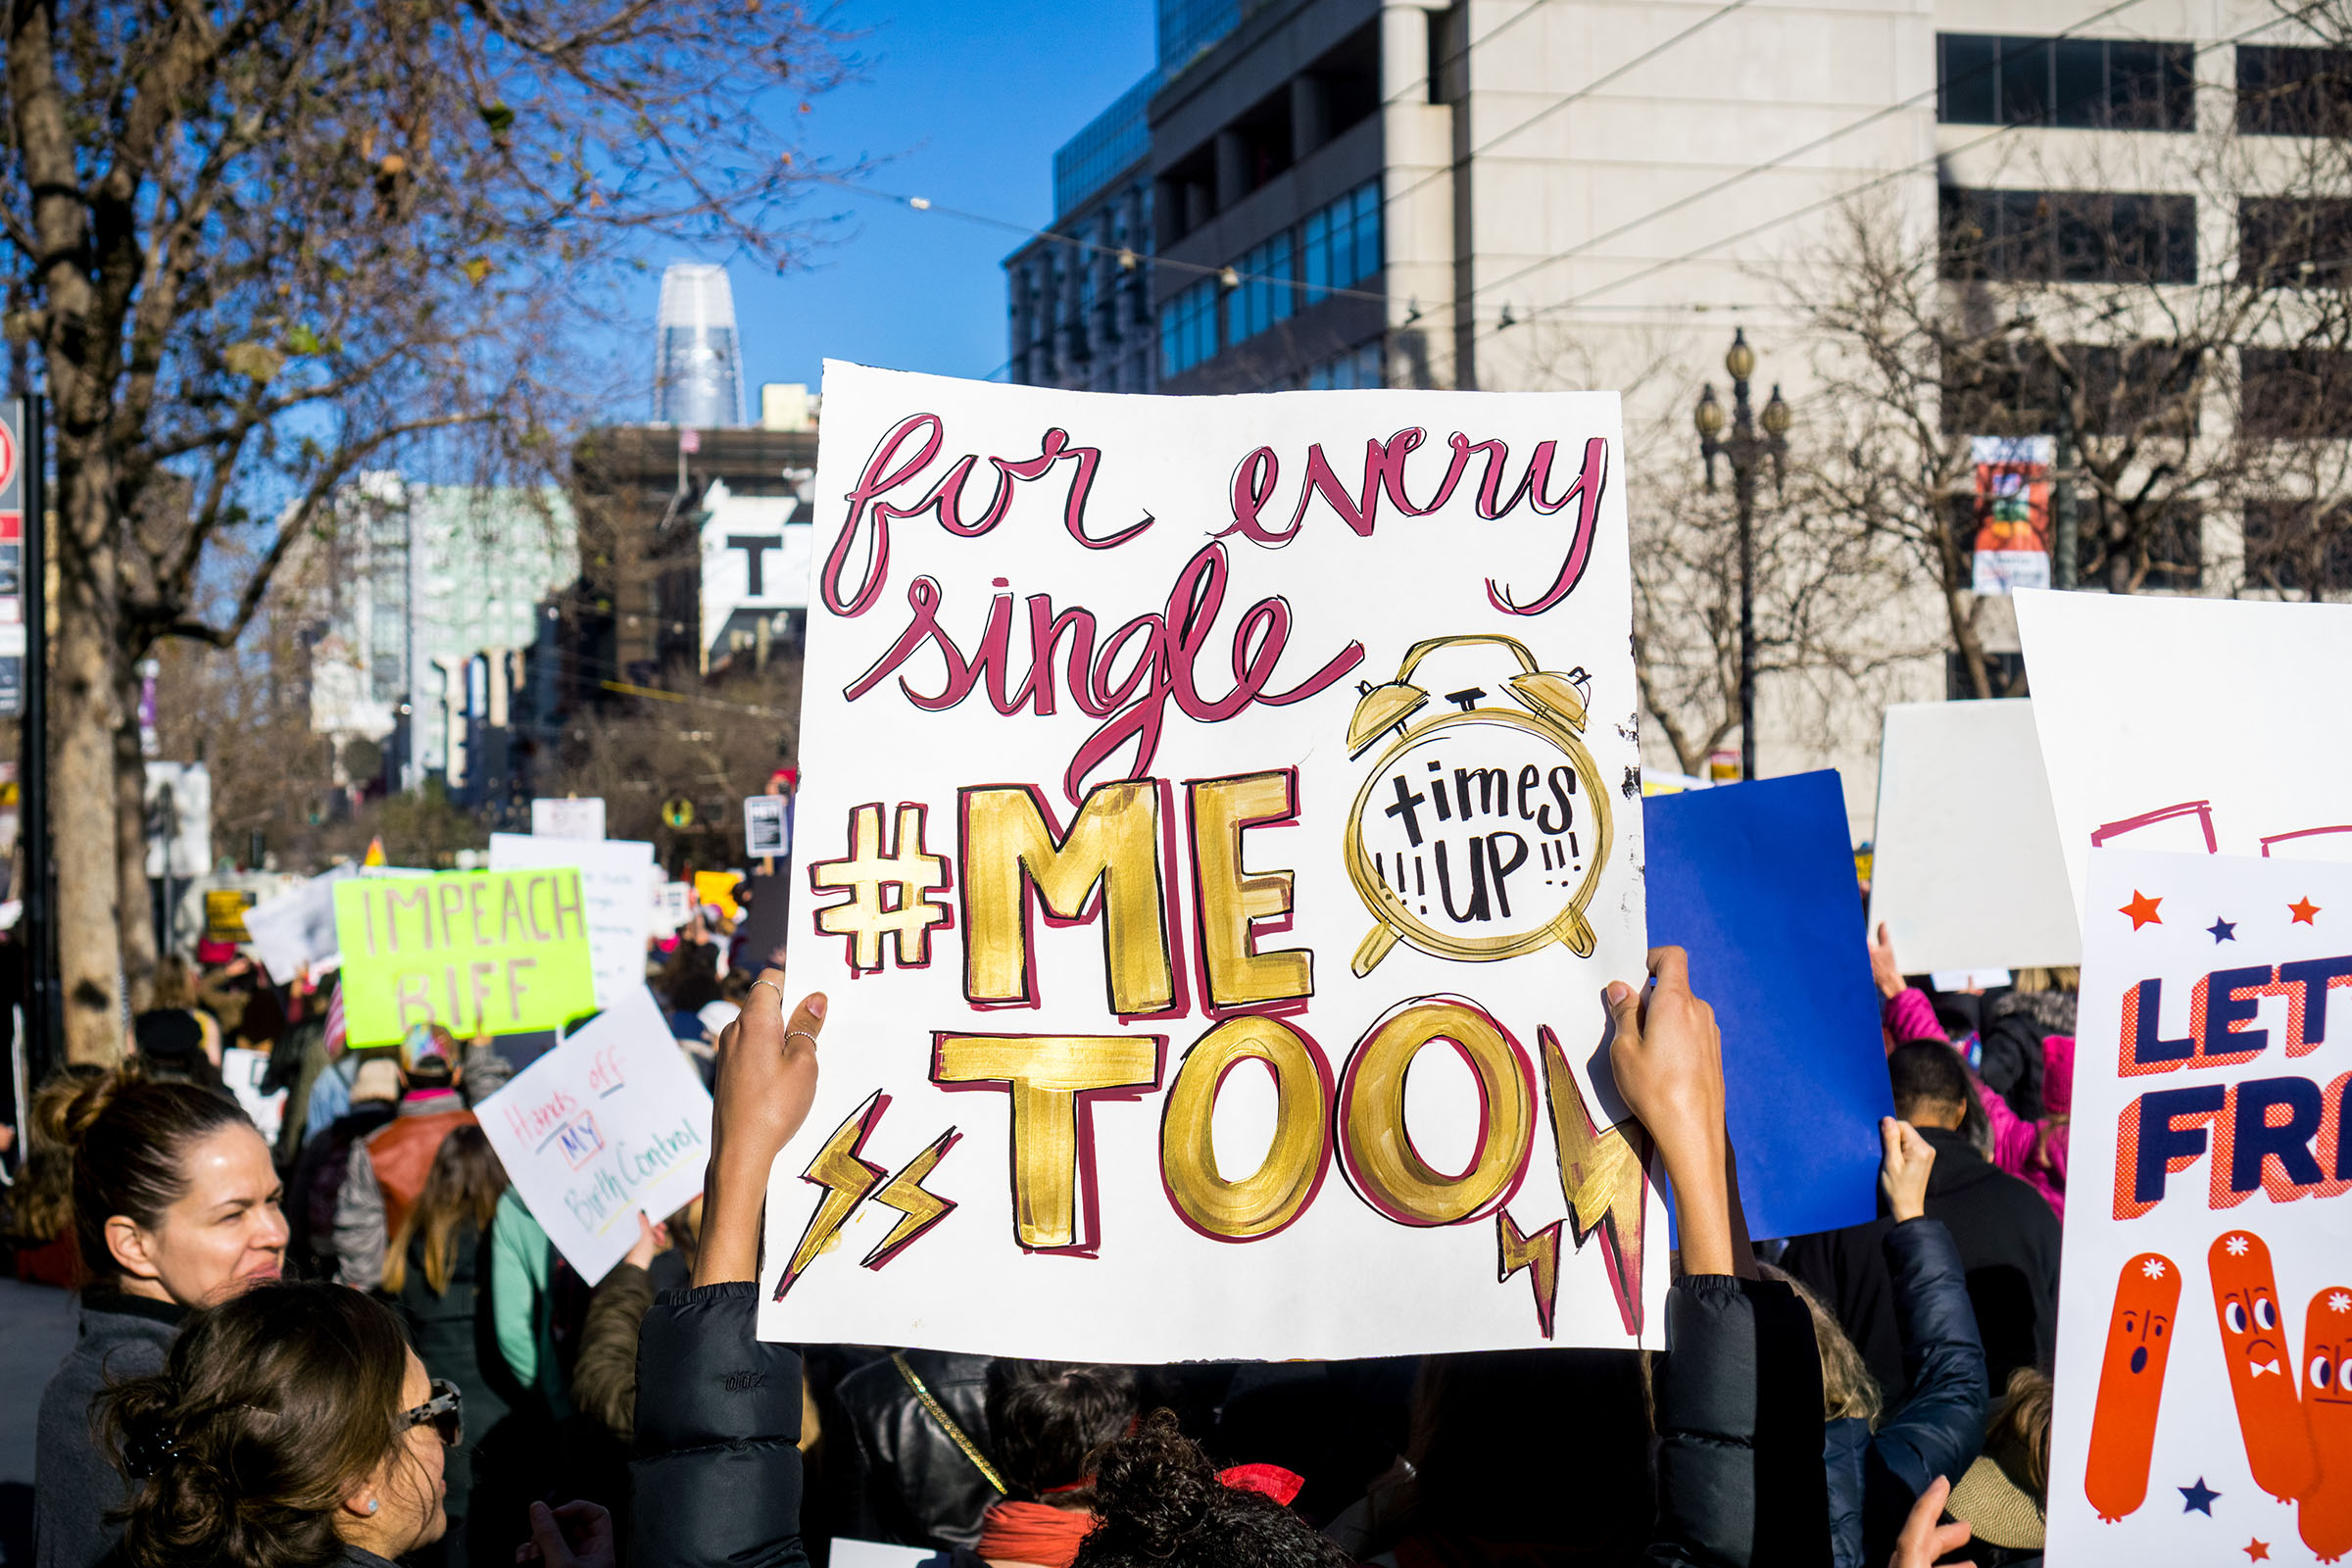 A person holds up a sign during a protest that says "For every single #MeToo time's up!"